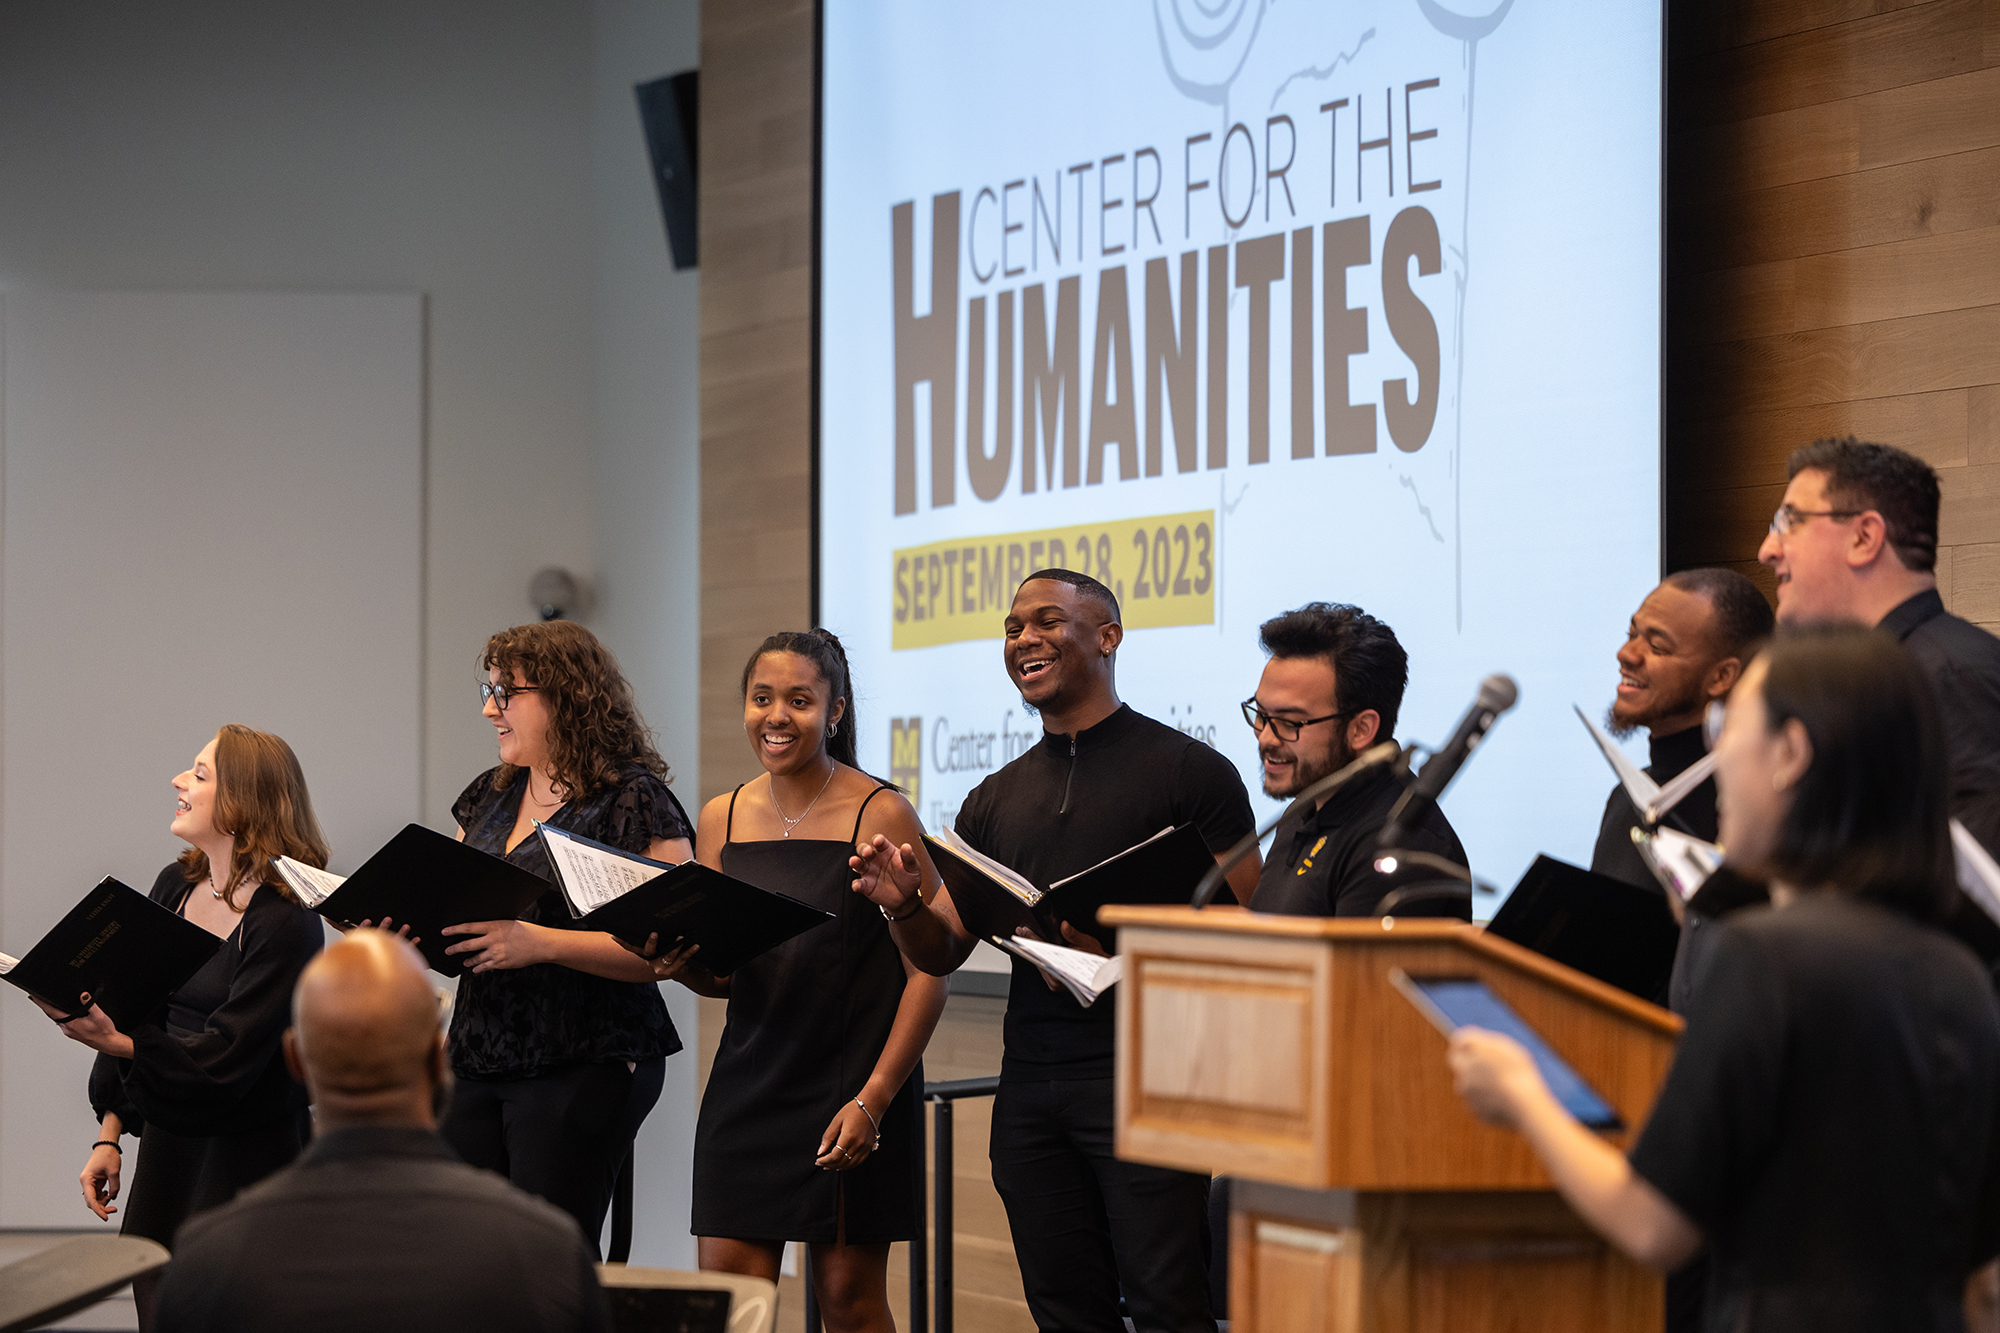 A choir from the MU College of Arts and Science, performs during the Center for the Humanities launch at the State Historical Society of Missouri.